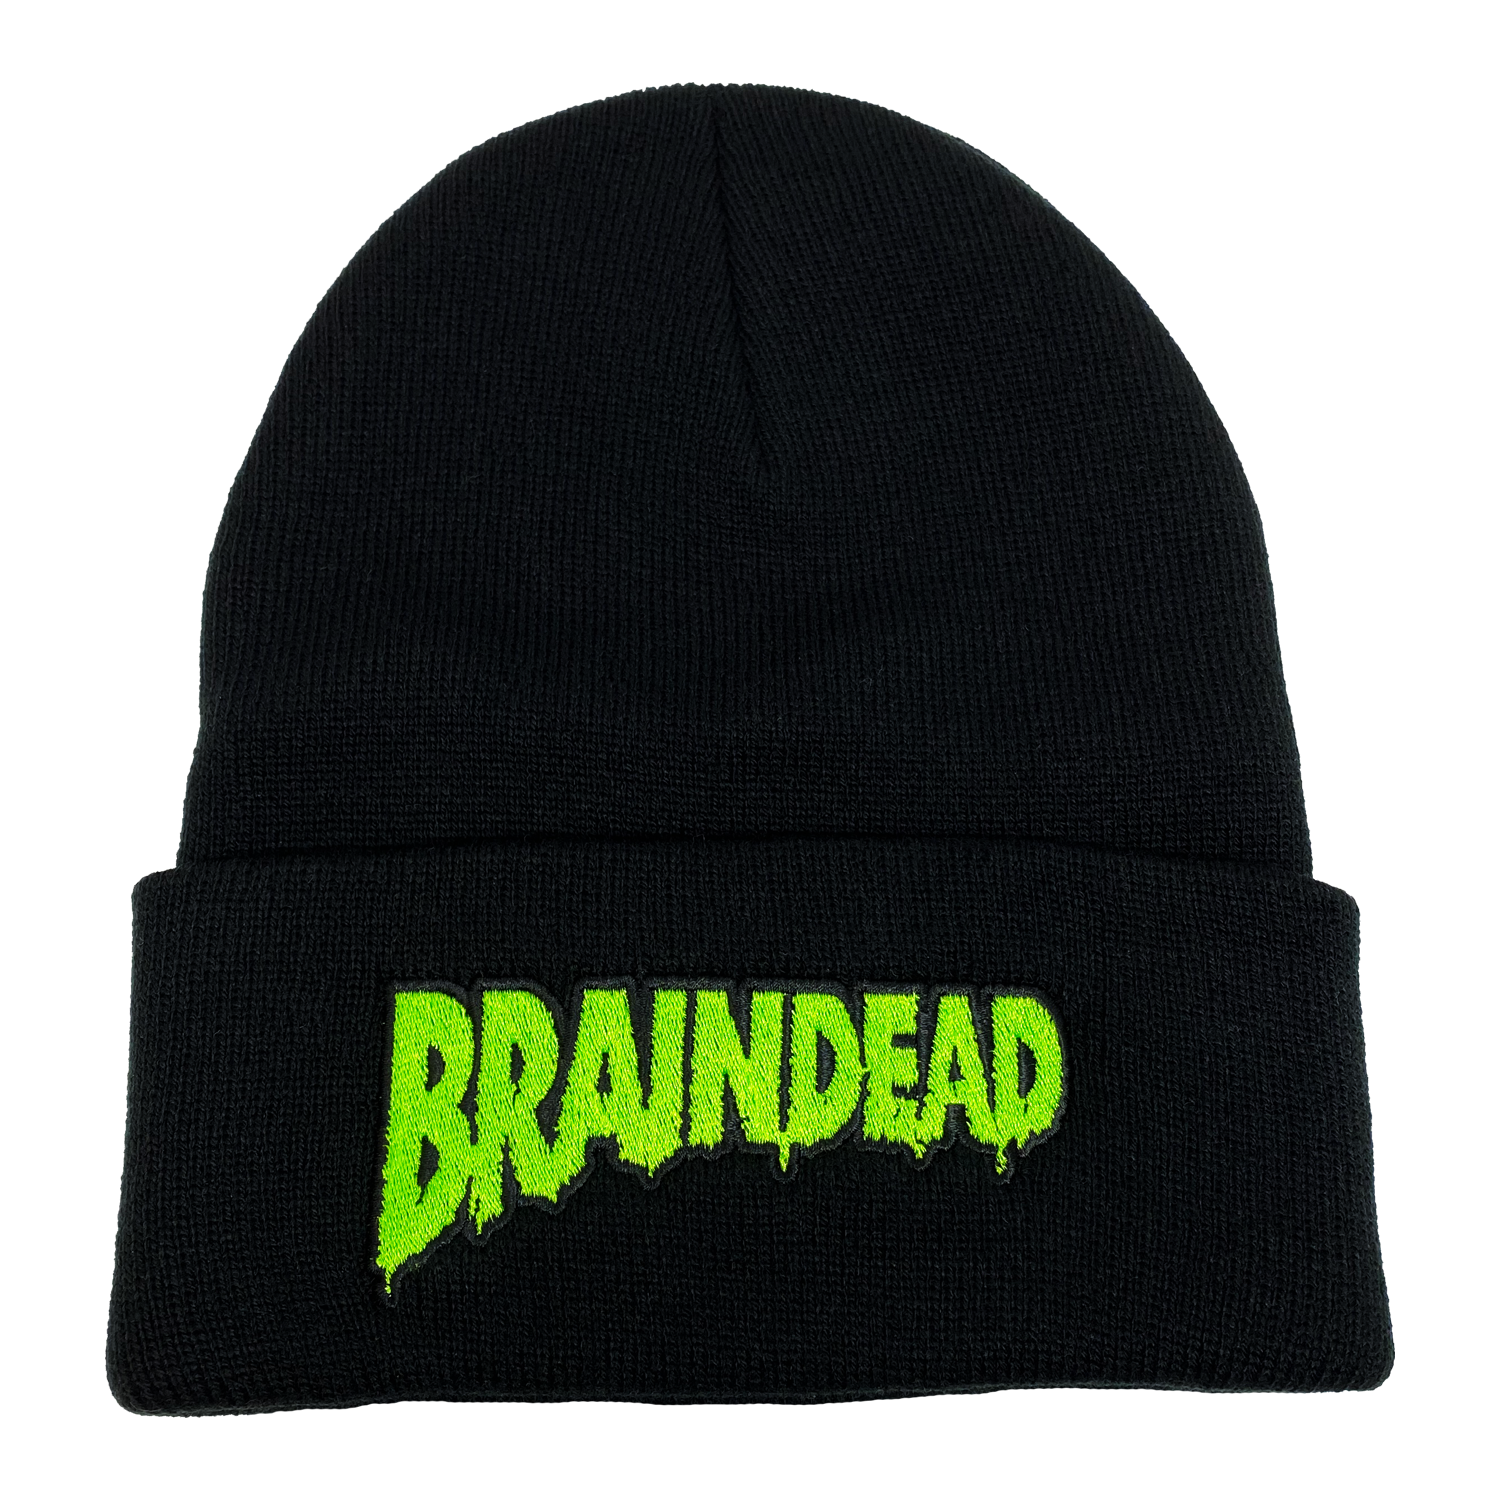 Braindead Embroidered Beanie - UNMASKED Horror & Punk Patches and Decor